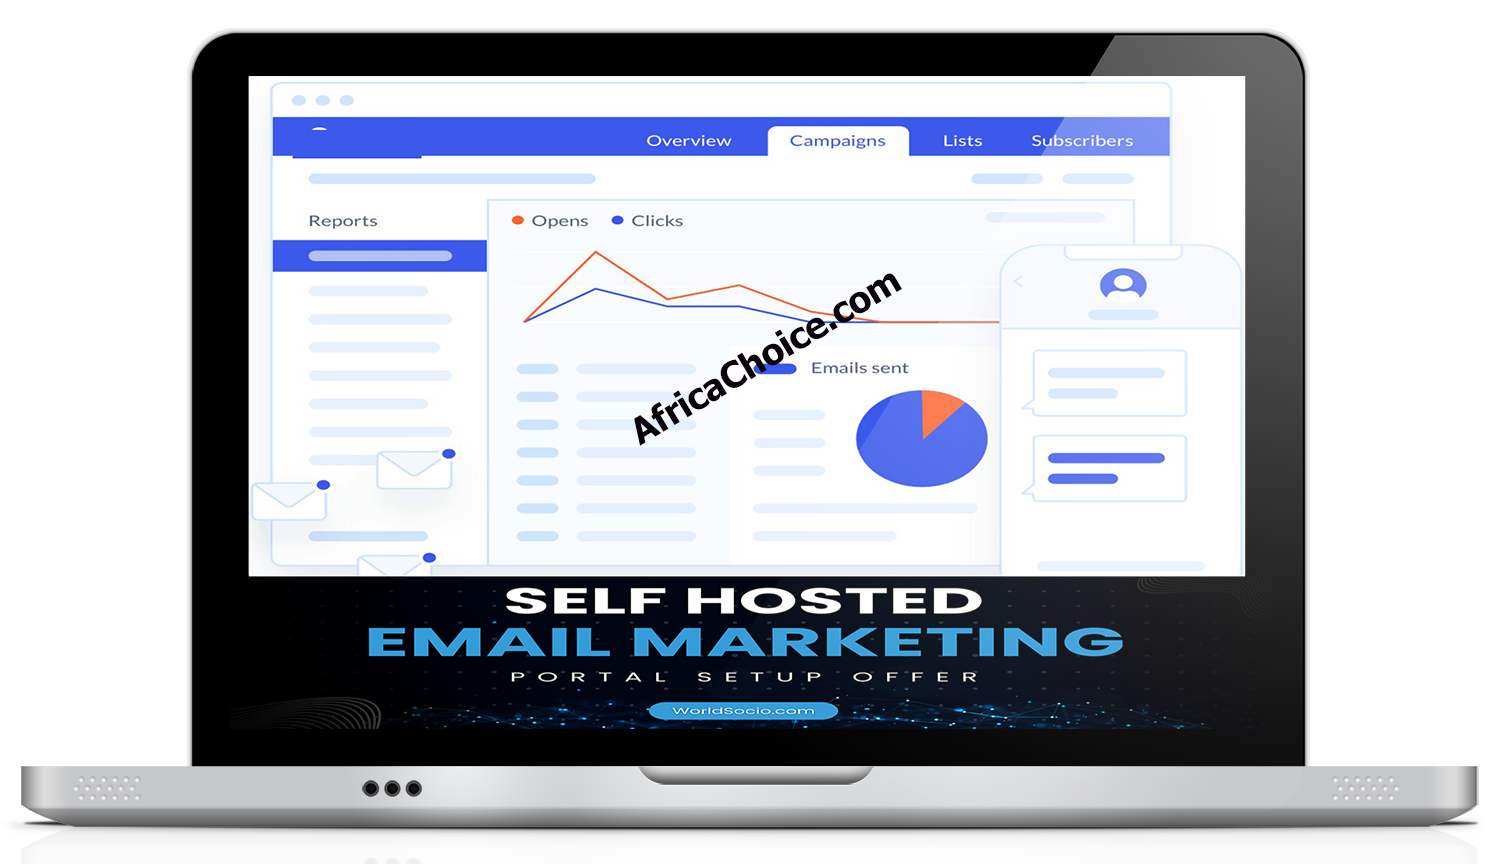 Self-hosted-email-marketing-portal-setup-offer,-by-mbonu-watson.png